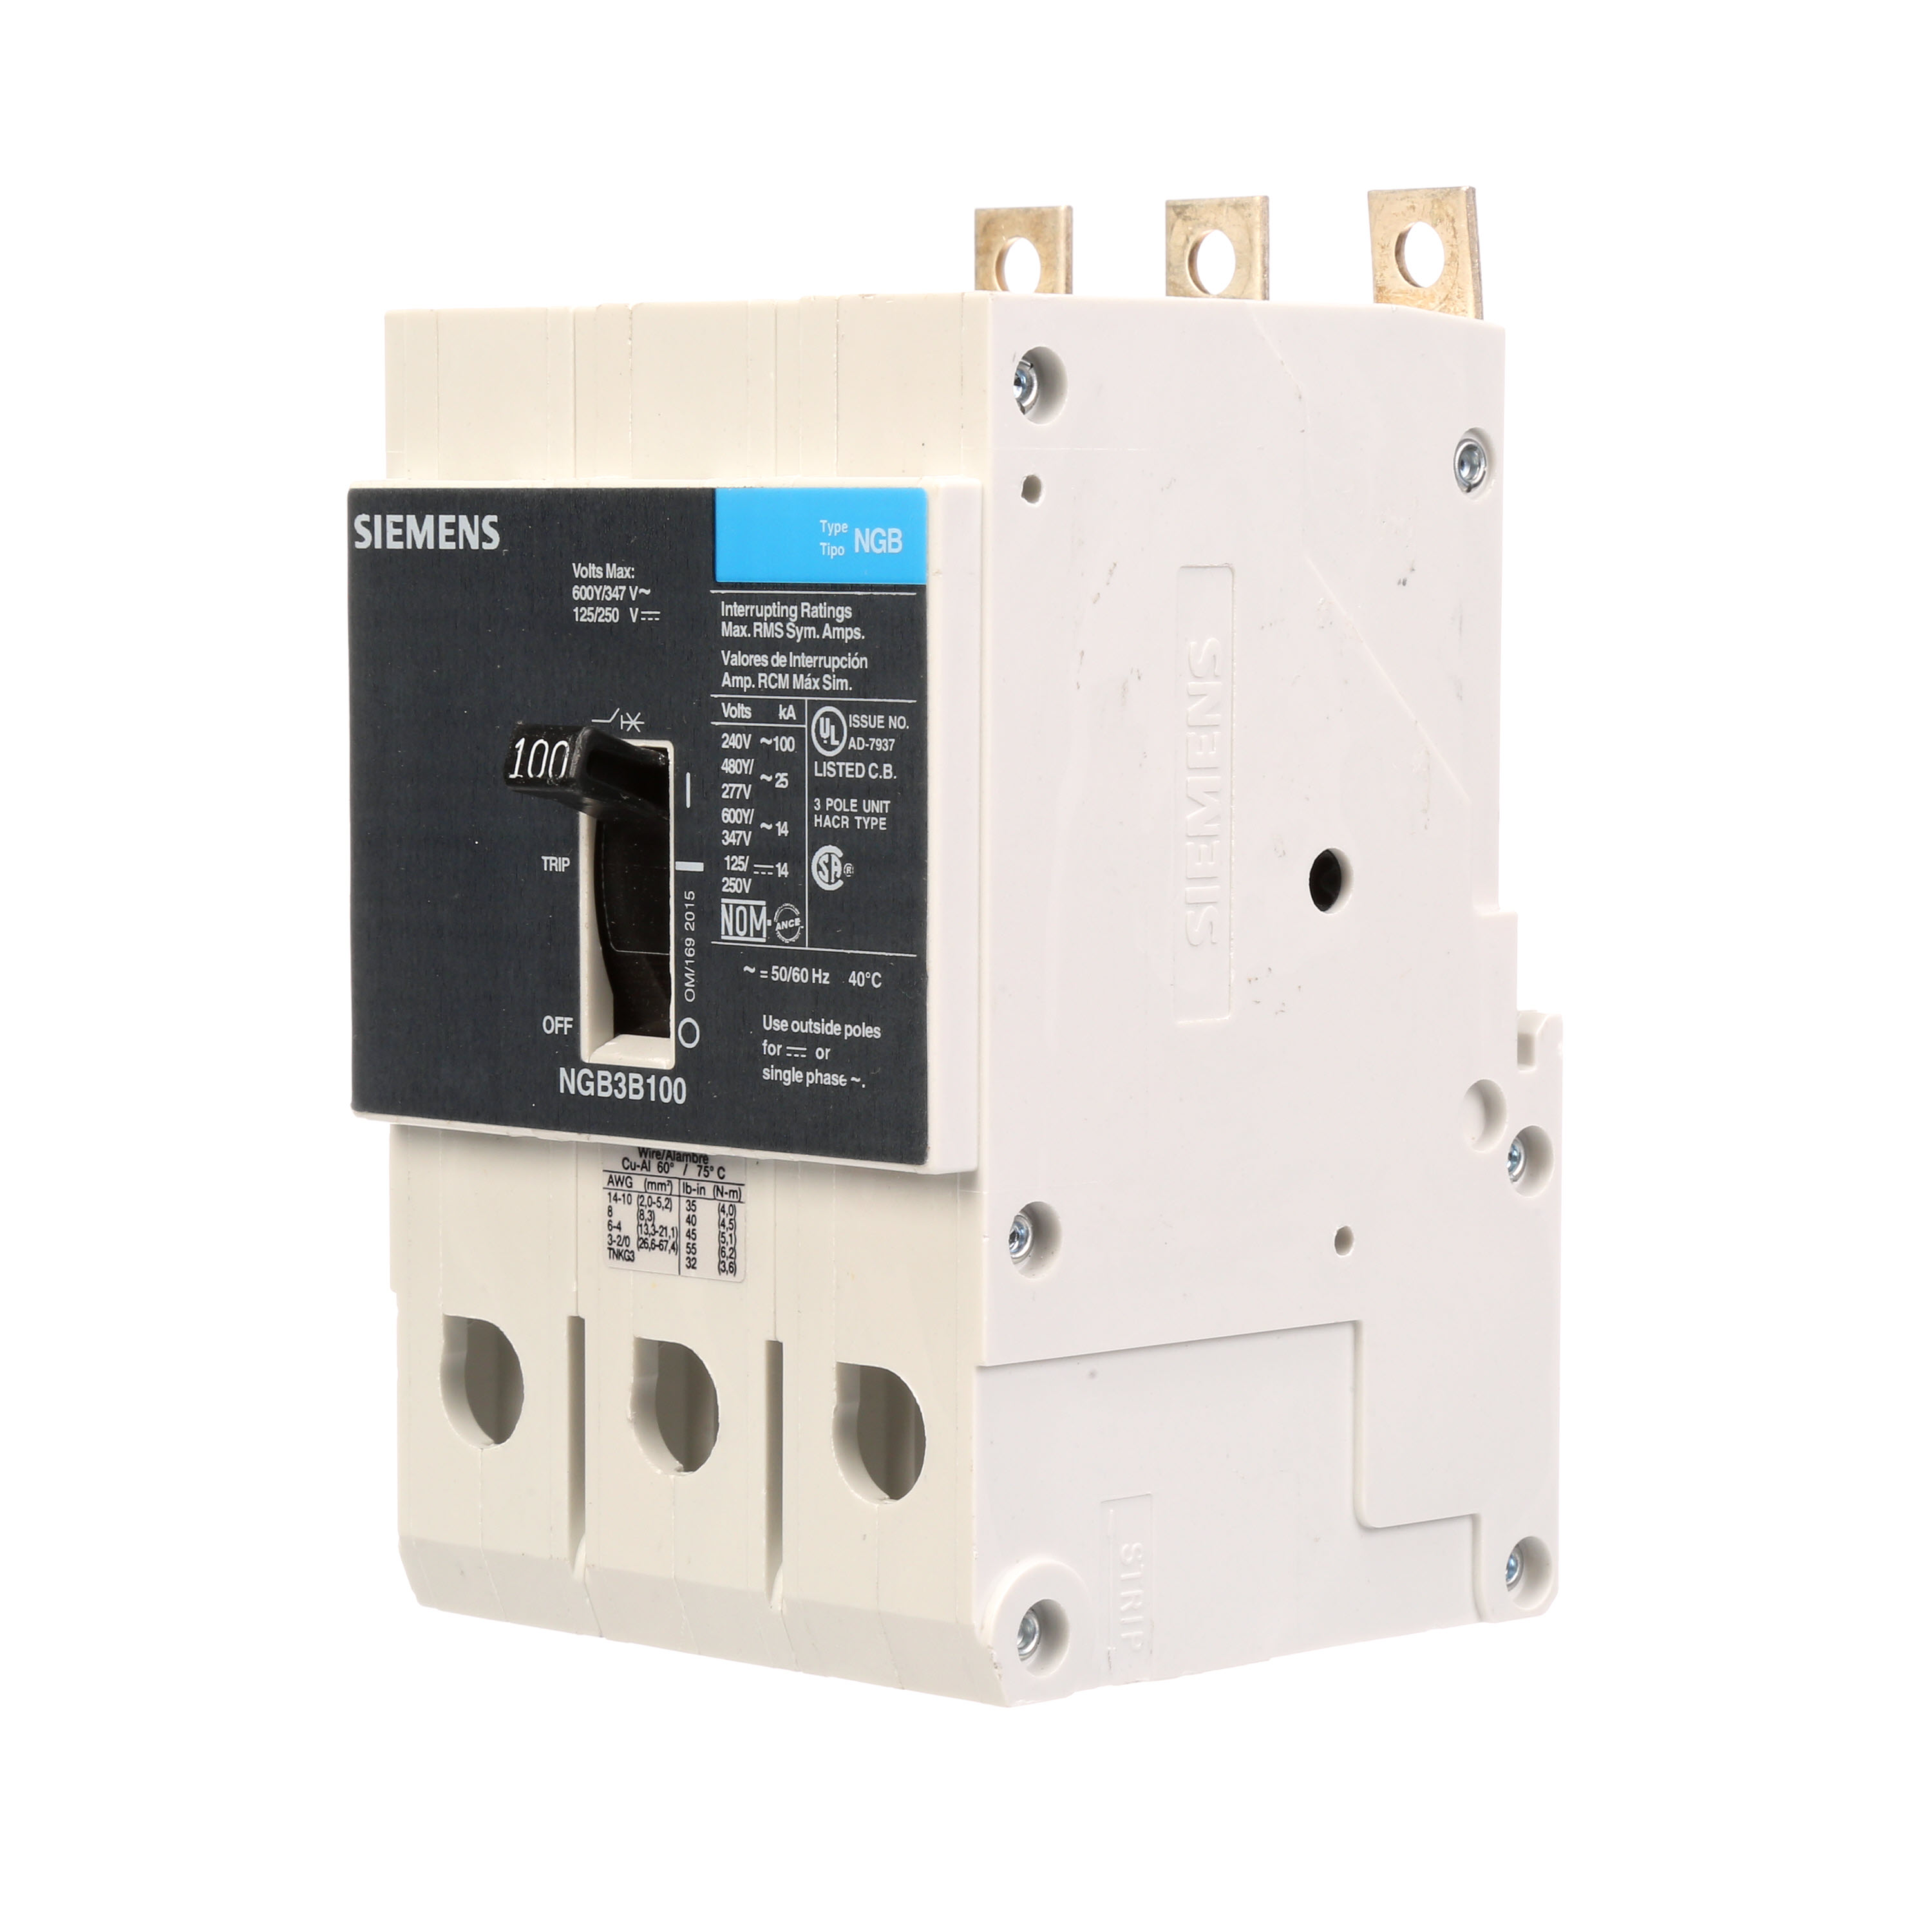 SIEMENS LOW VOLTAGE PANELBOARD MOUNT G FRAME CIRCUIT BREAKER WITH THERMAL - MAGNETIC TRIP. UL LISTED NGB FRAME WITH STANDARD BREAKING CAPACITY. 100A 3-POLE (14KAIC AT 600Y/347V) (25KAIC AT 480Y/277V). SPECIAL FEATURES MOUNTS ON PANELBOARD,NO LUGS, VALUE PACK. DIMENSIONS (W x H x D) IN 3 x 5.4 x 2.8.